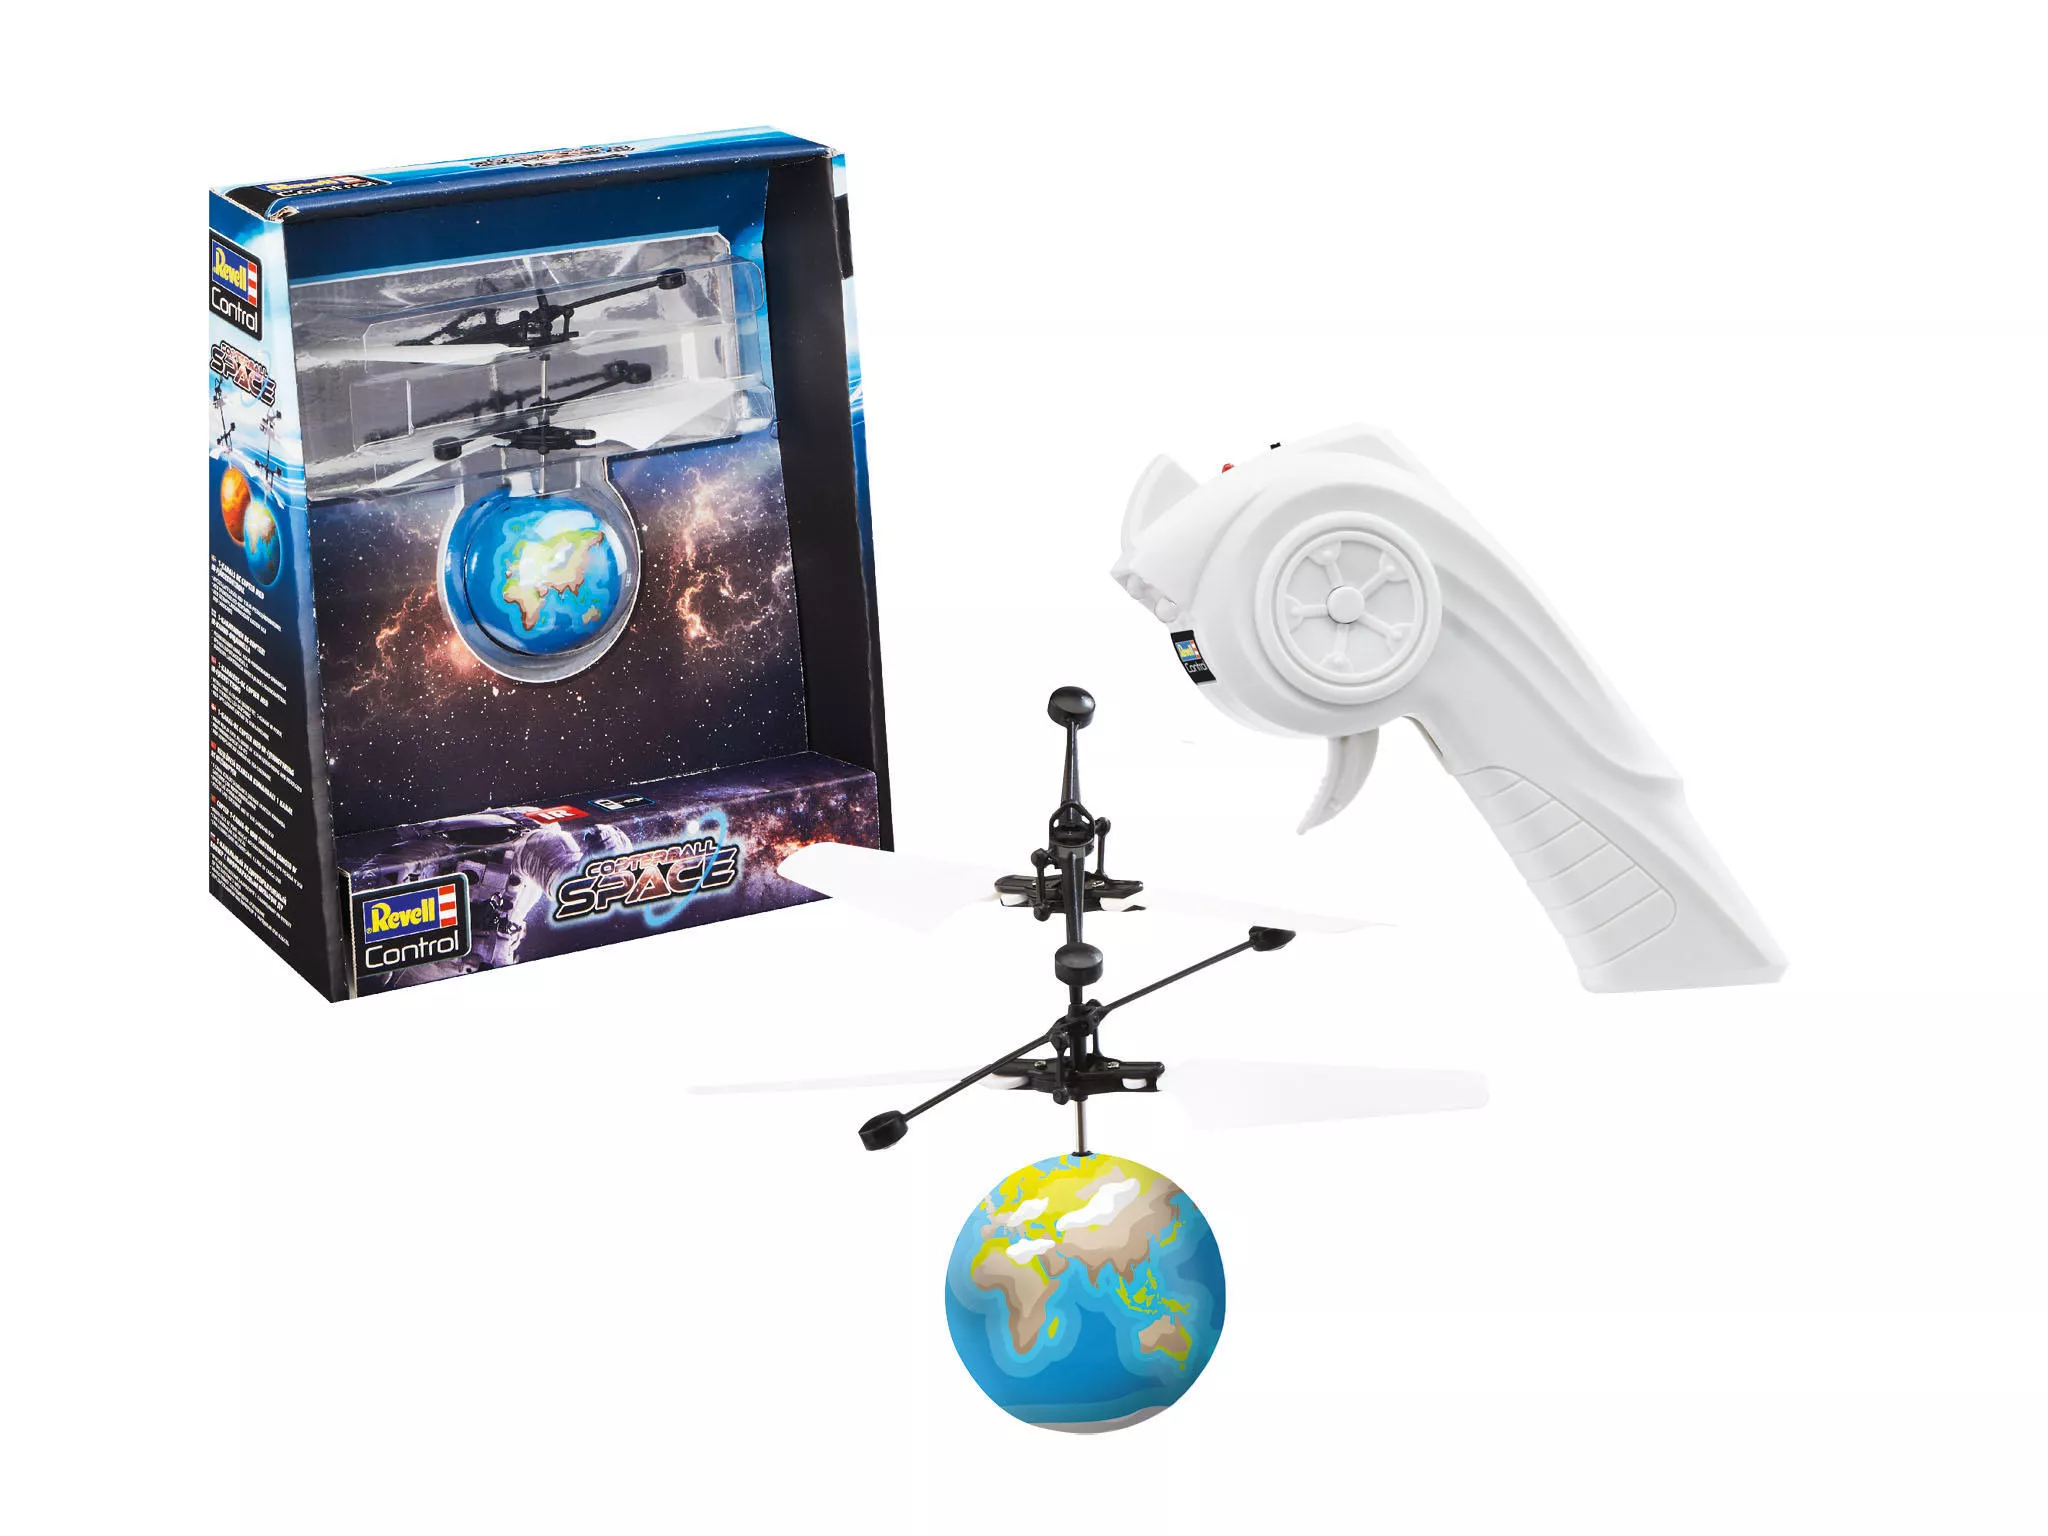 Revell 24976 RC Copter Ball "Space" Earth Revell Control Ferngesteuerter Heliball